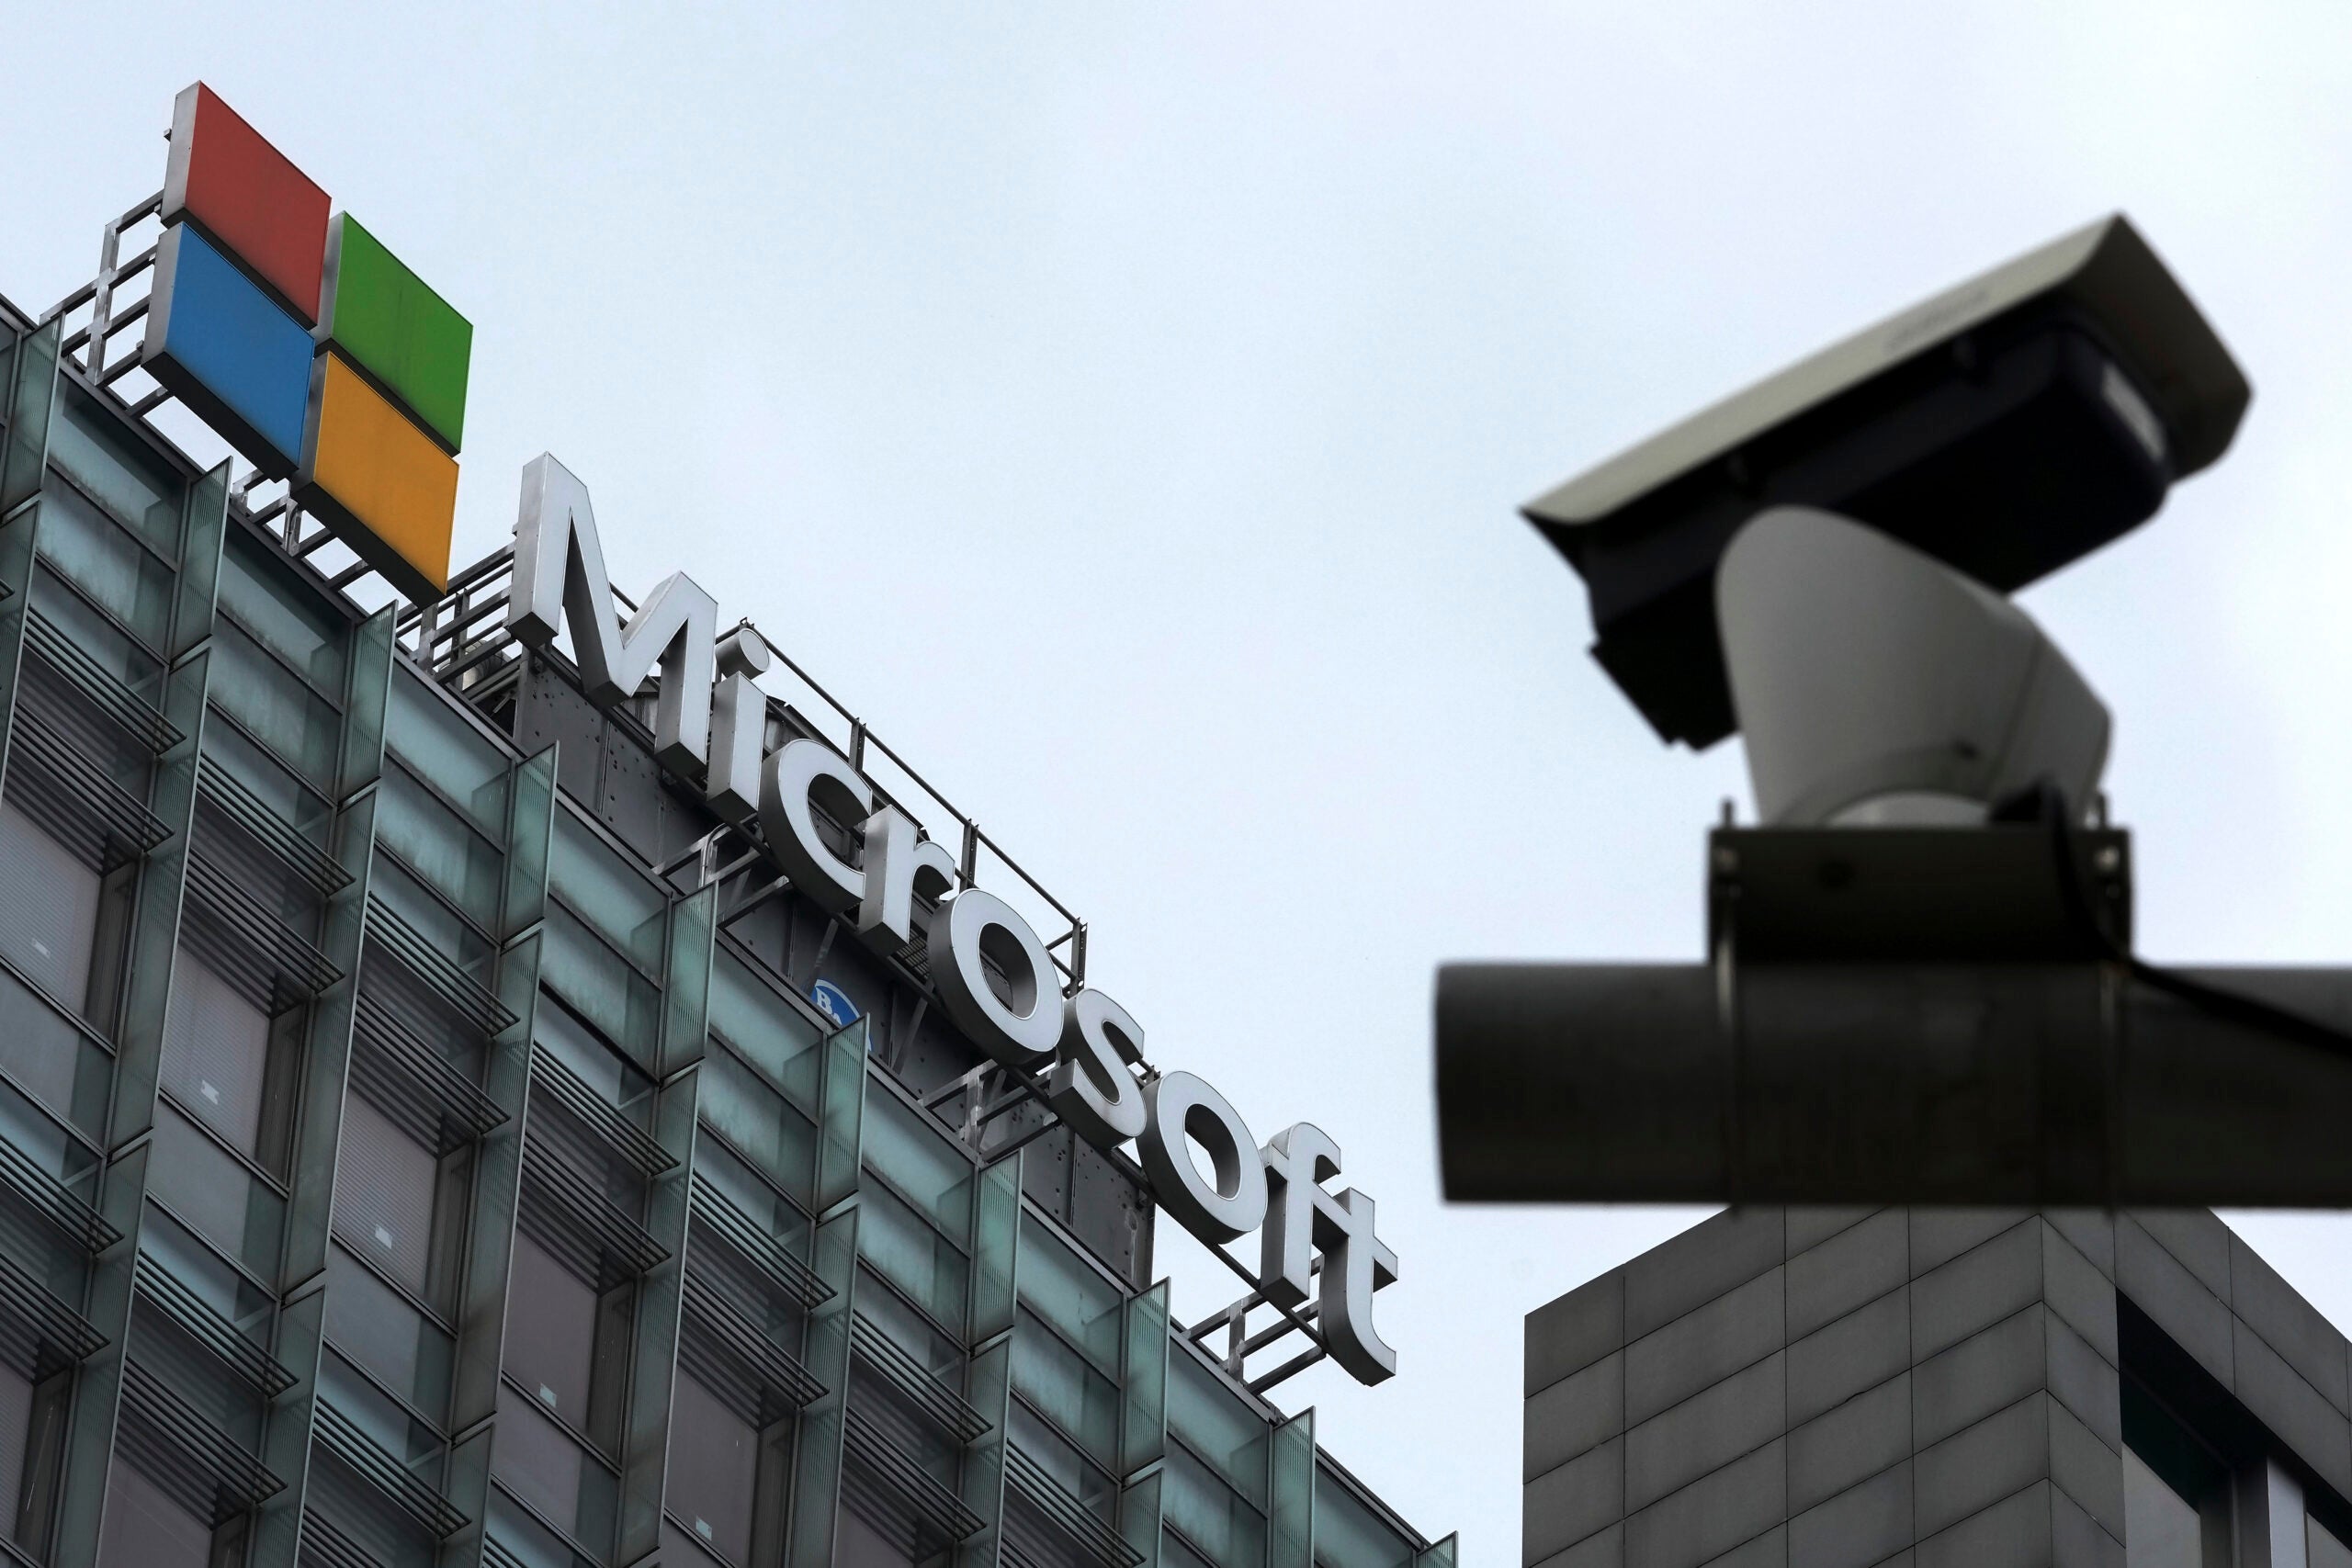 A security surveillance camera is seen near the Microsoft office building in Beijing, July 20, 2021.